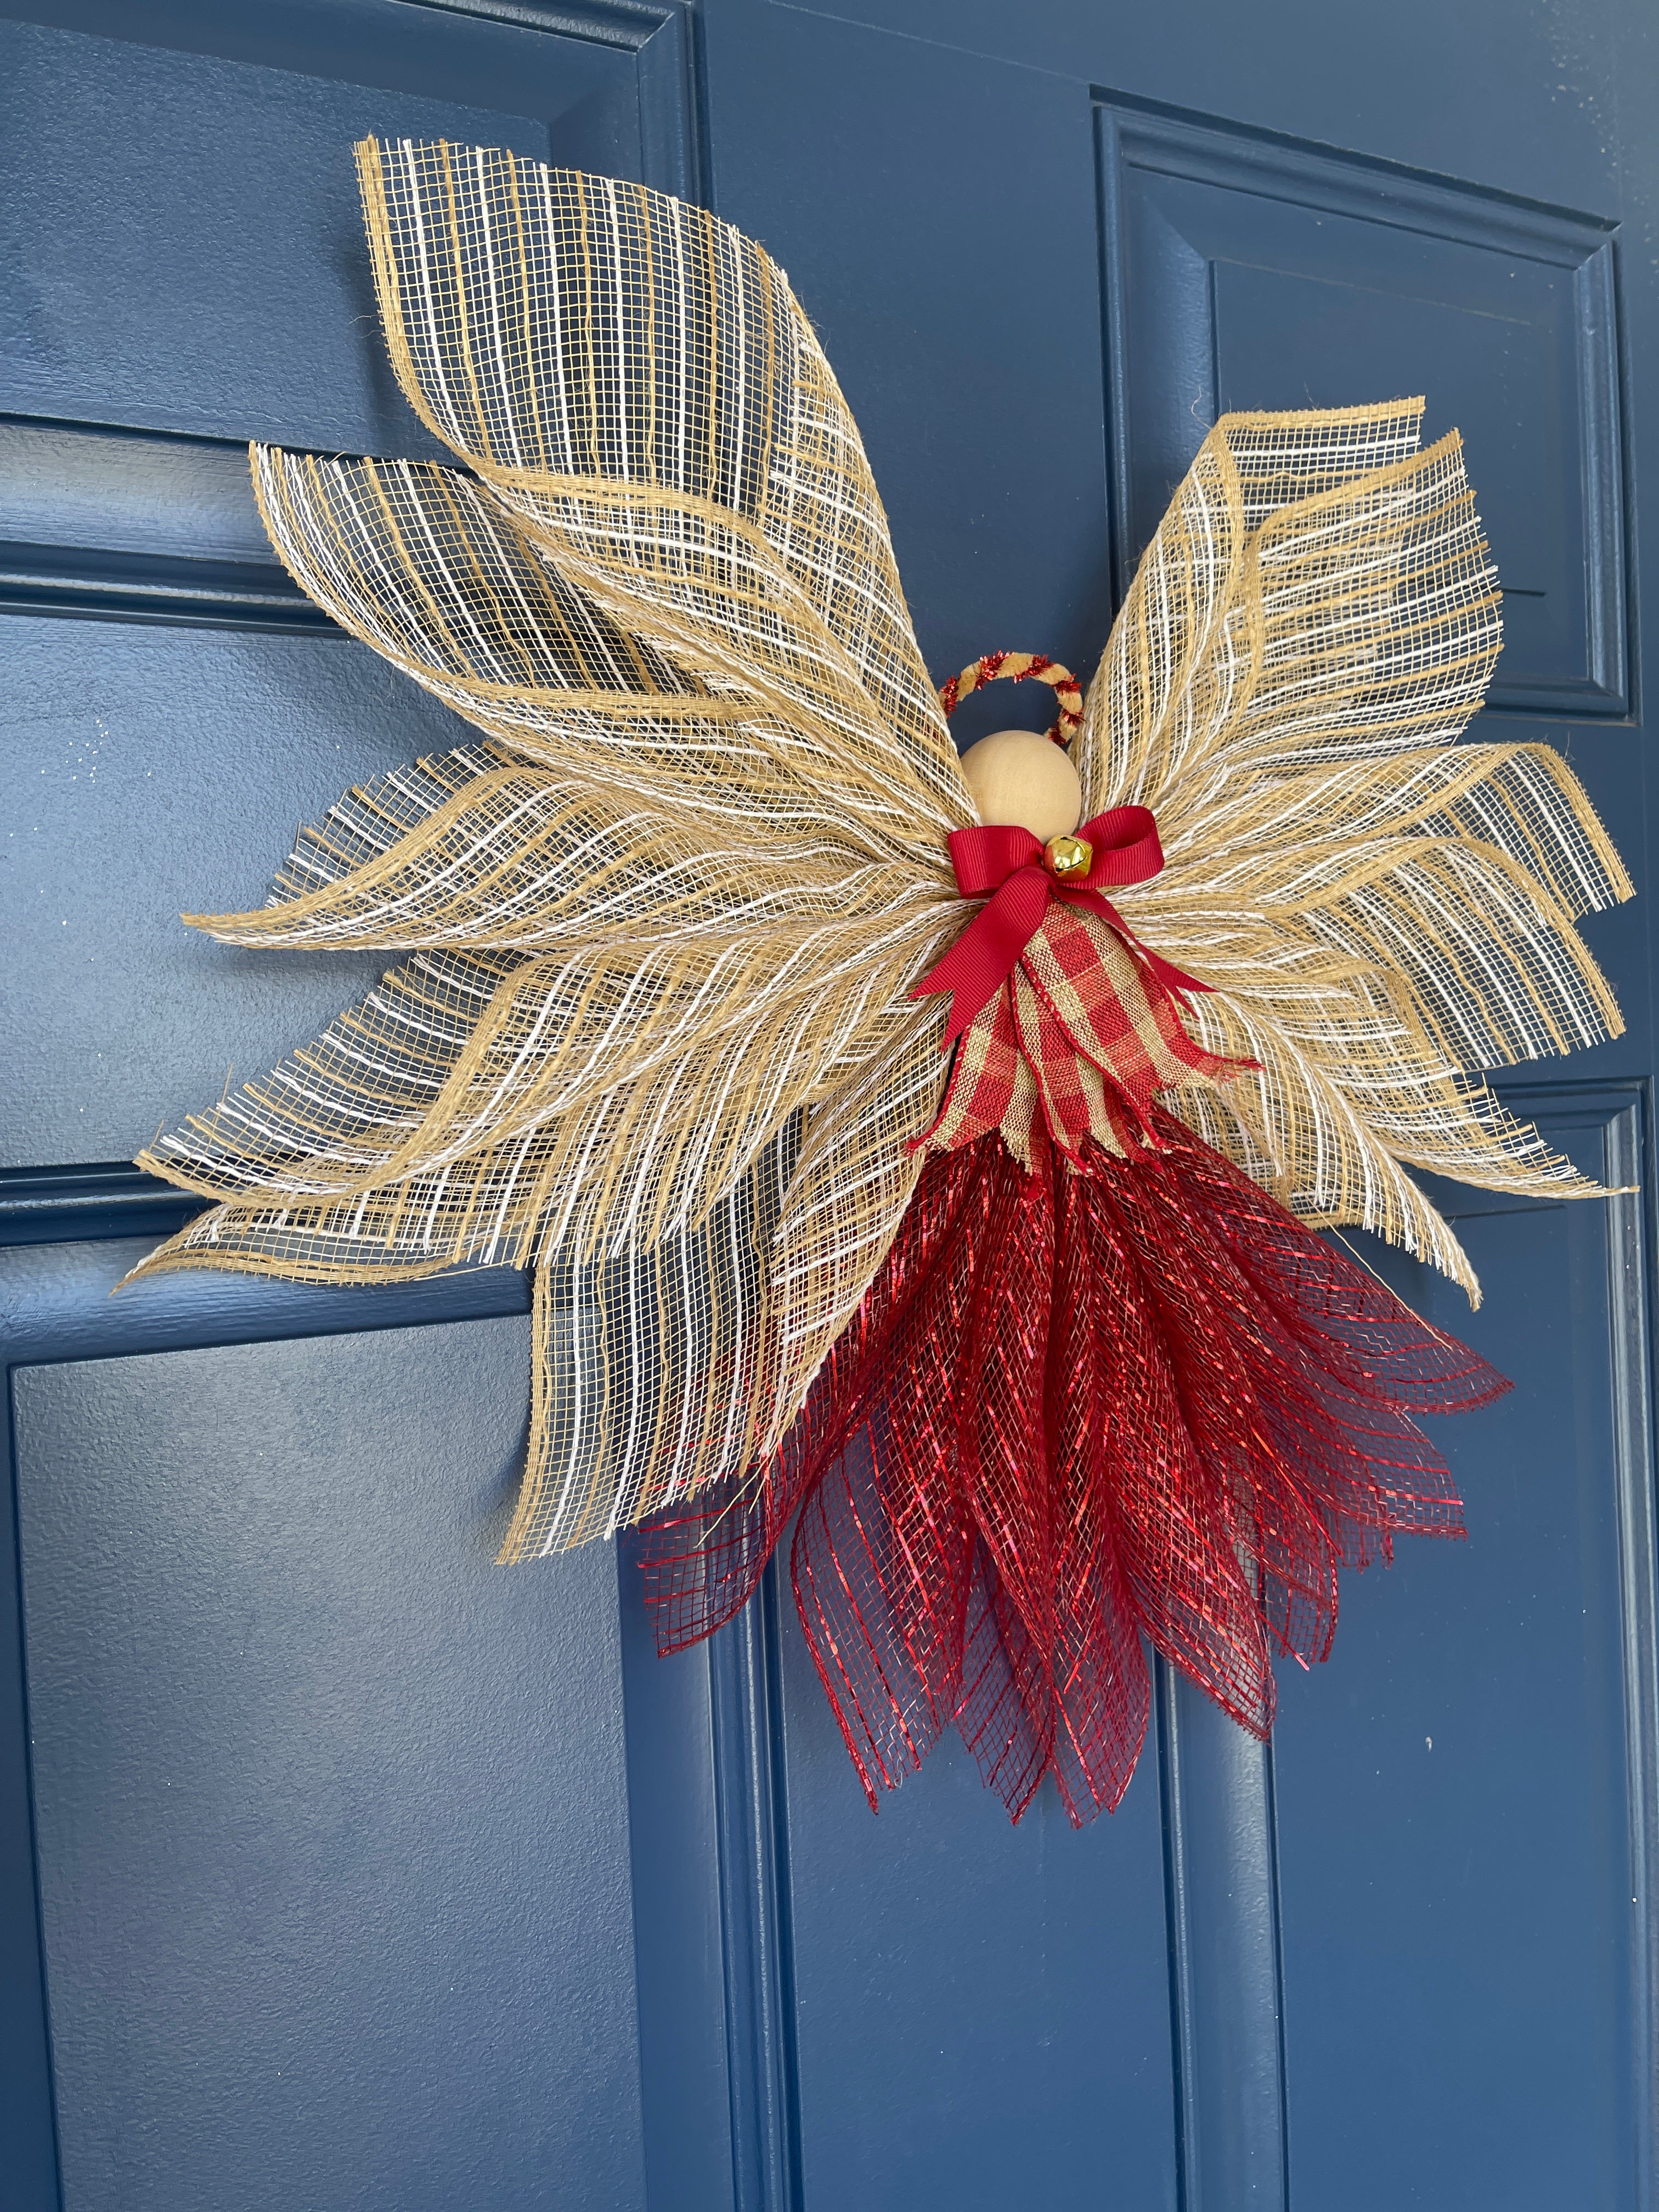 Left Side View of Rustic Farmhouse Jute Burlap and Red Metallic Angel Tree Topper with Red and Tan Plaid Apron, Red Bow, Gold Bell and Wooden Head on a Blue Door